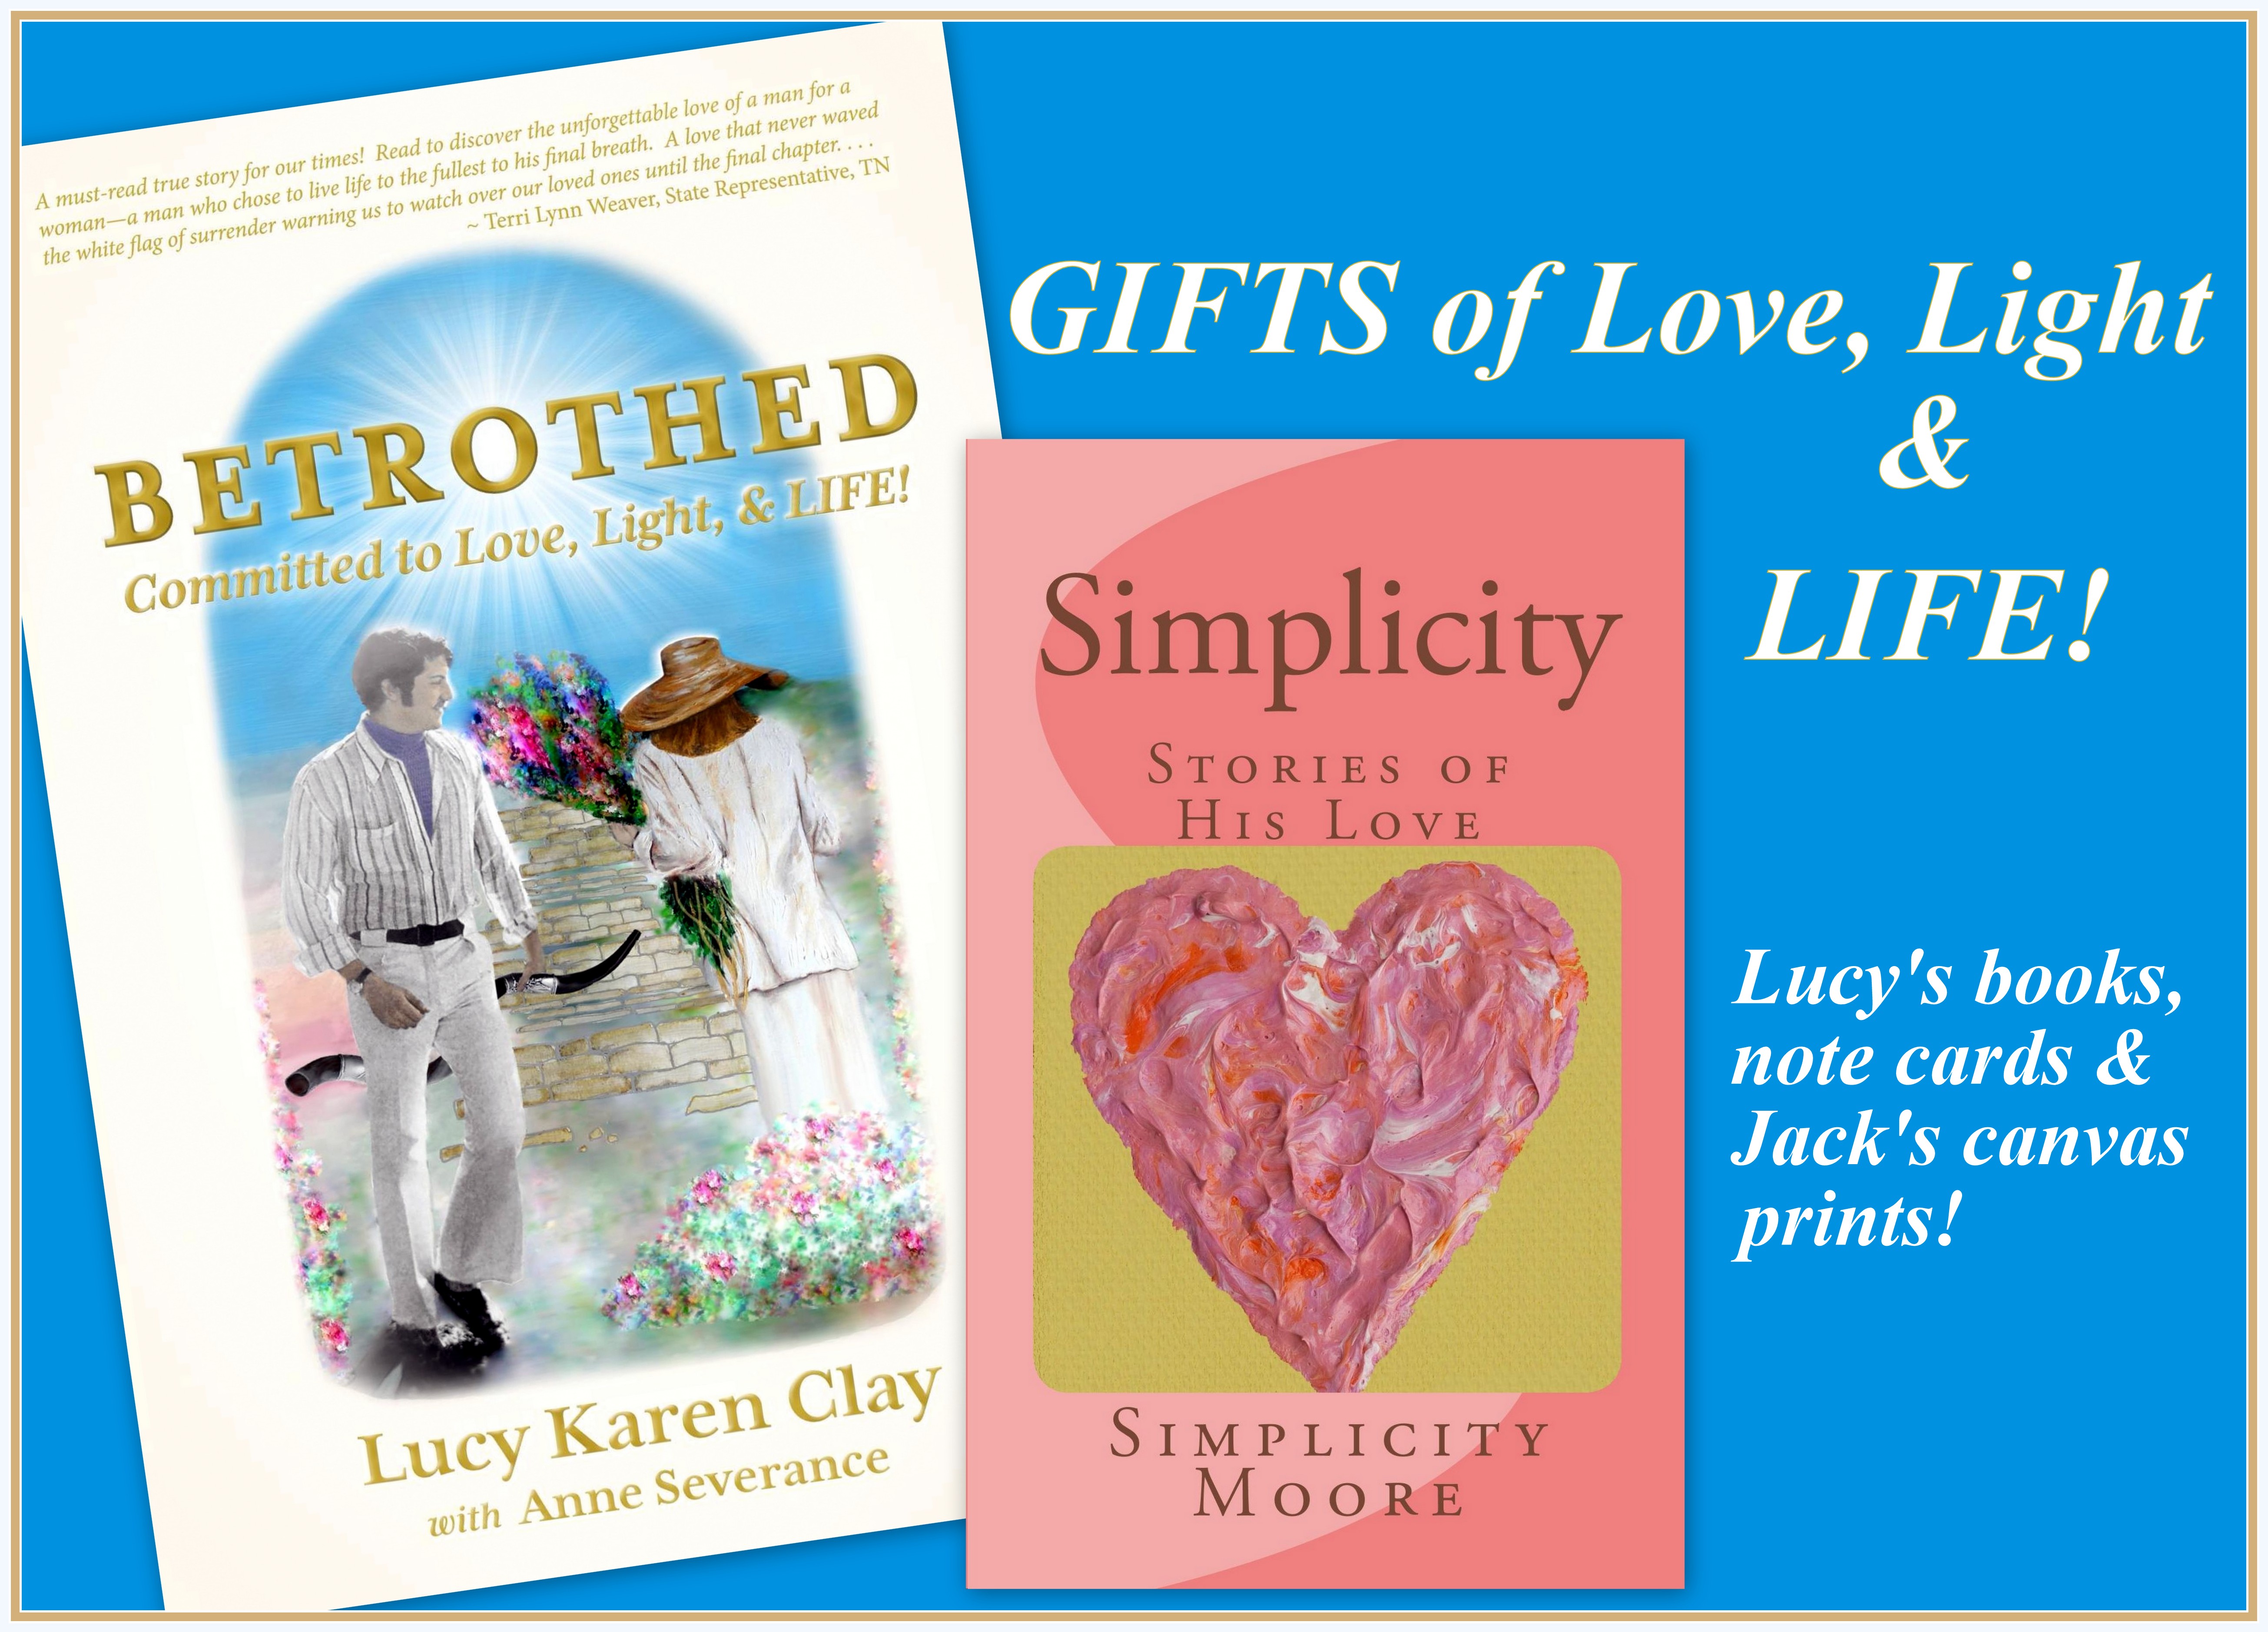 Gifts of Love, Light and LIFE for Christmas and Valentine's Day!